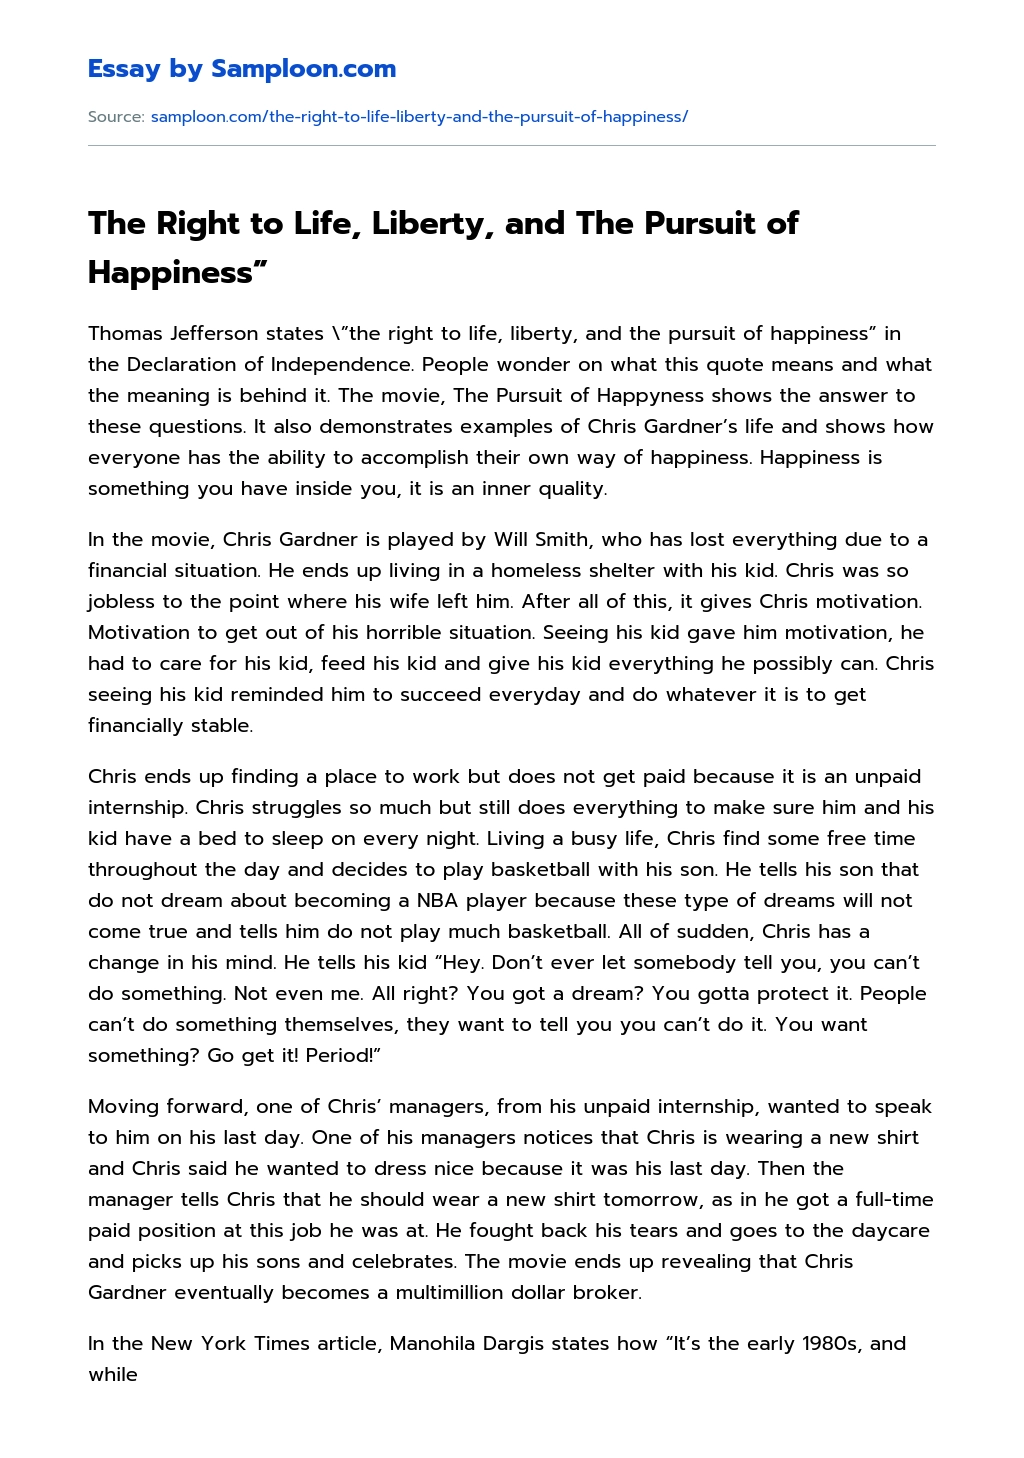 The Right to Life, Liberty, and The Pursuit of Happiness” essay